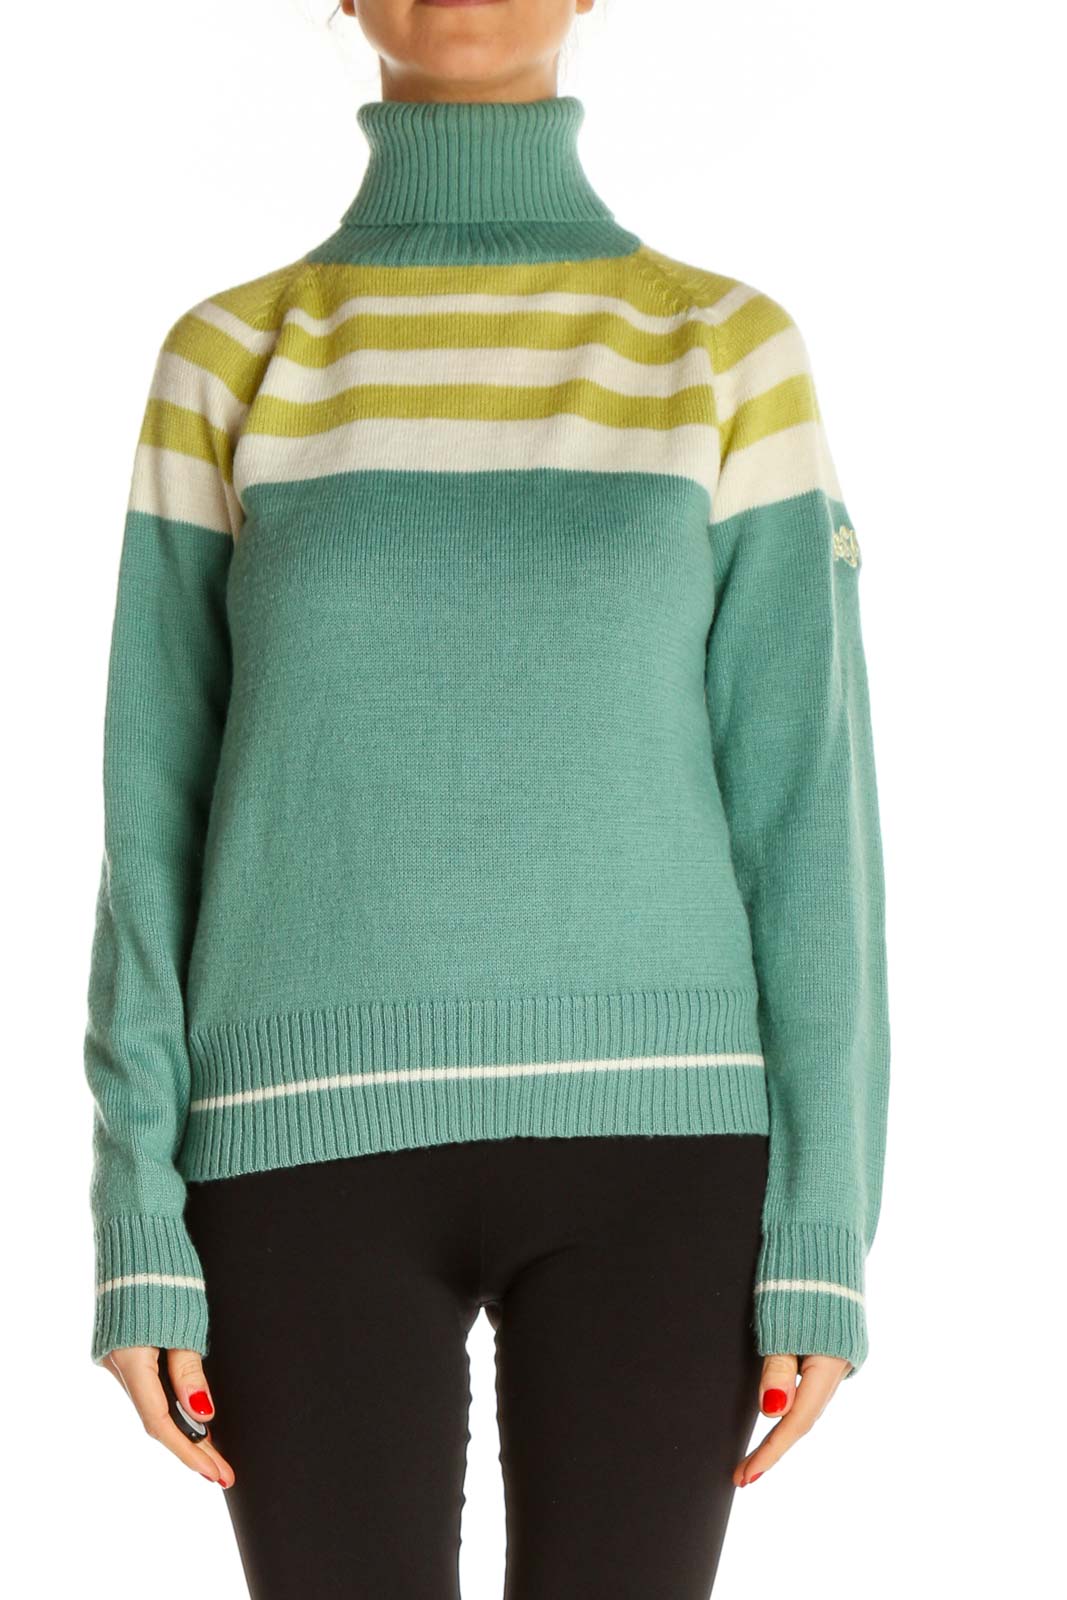 Green Striped All Day Wear Sweater Front